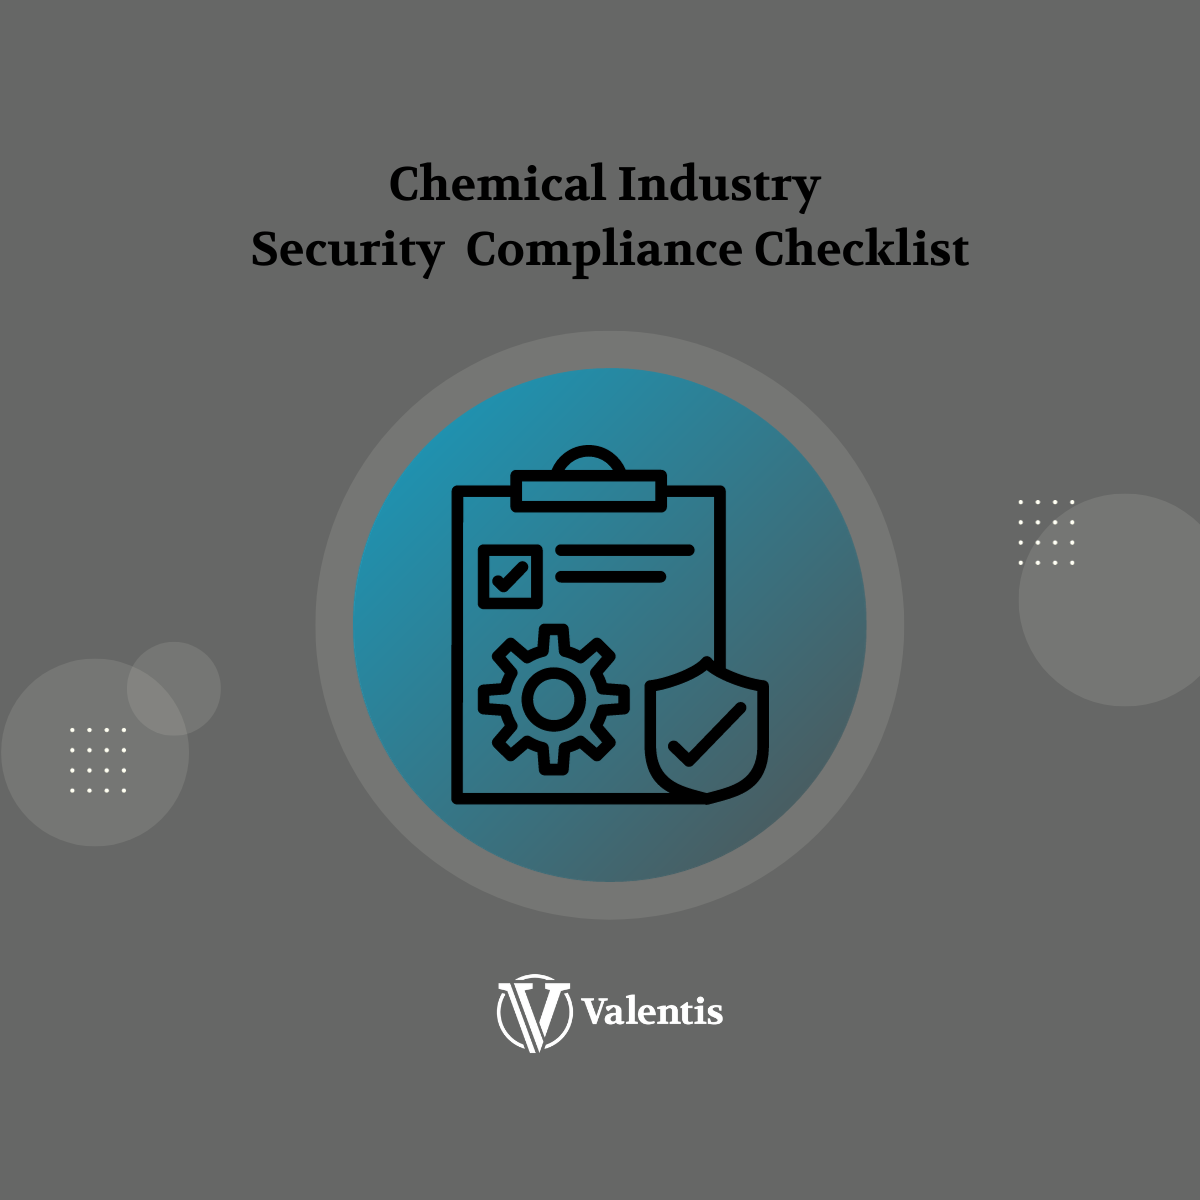 Chemical Industry Security Compliance 1Checklist